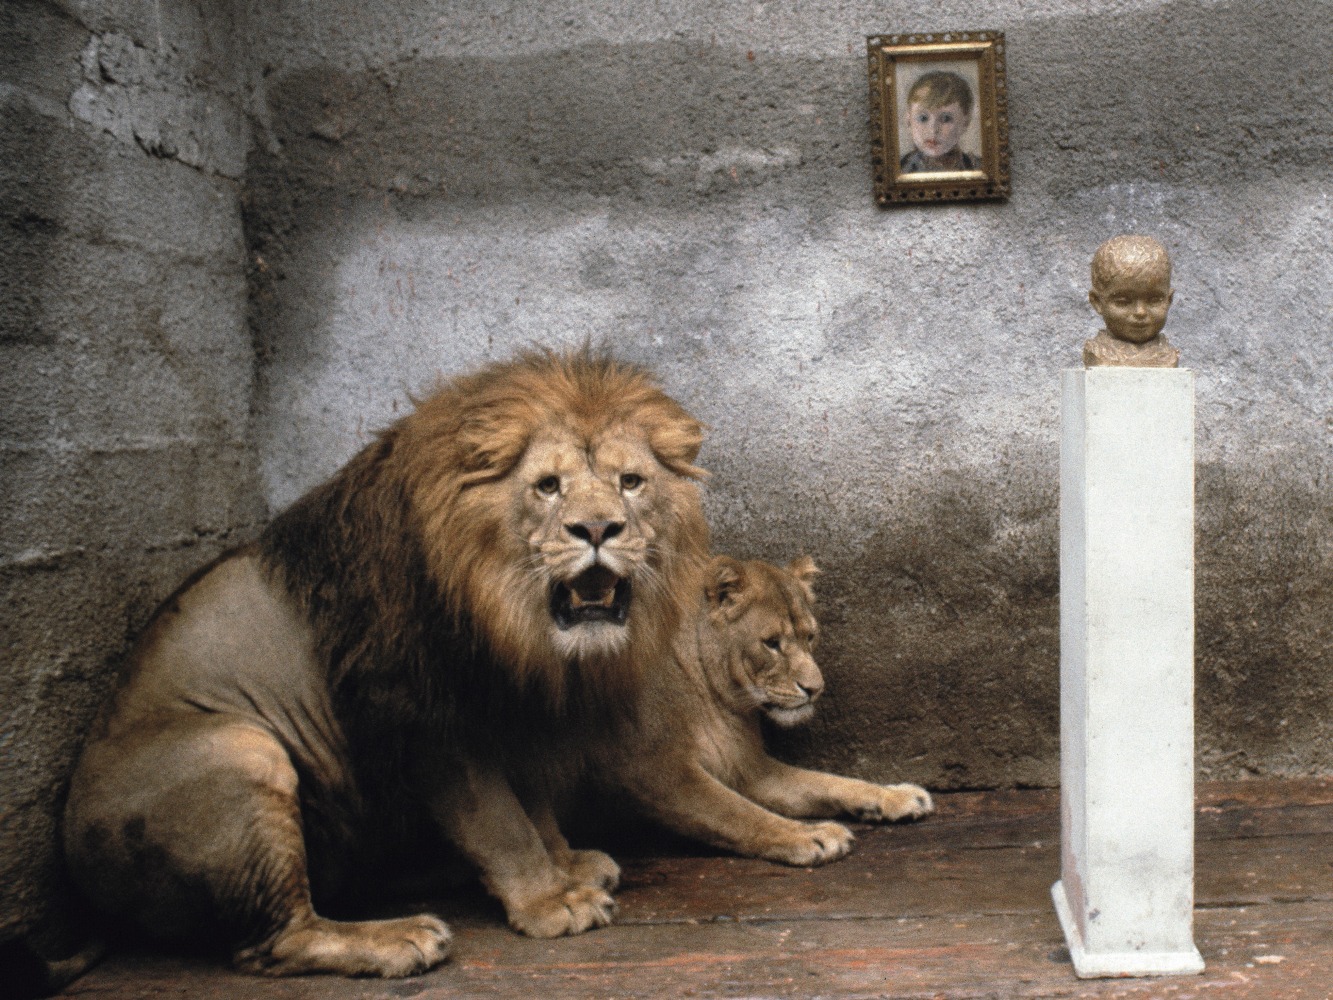 male and female lions next to a pedestal holding the bust of a child in a cement room